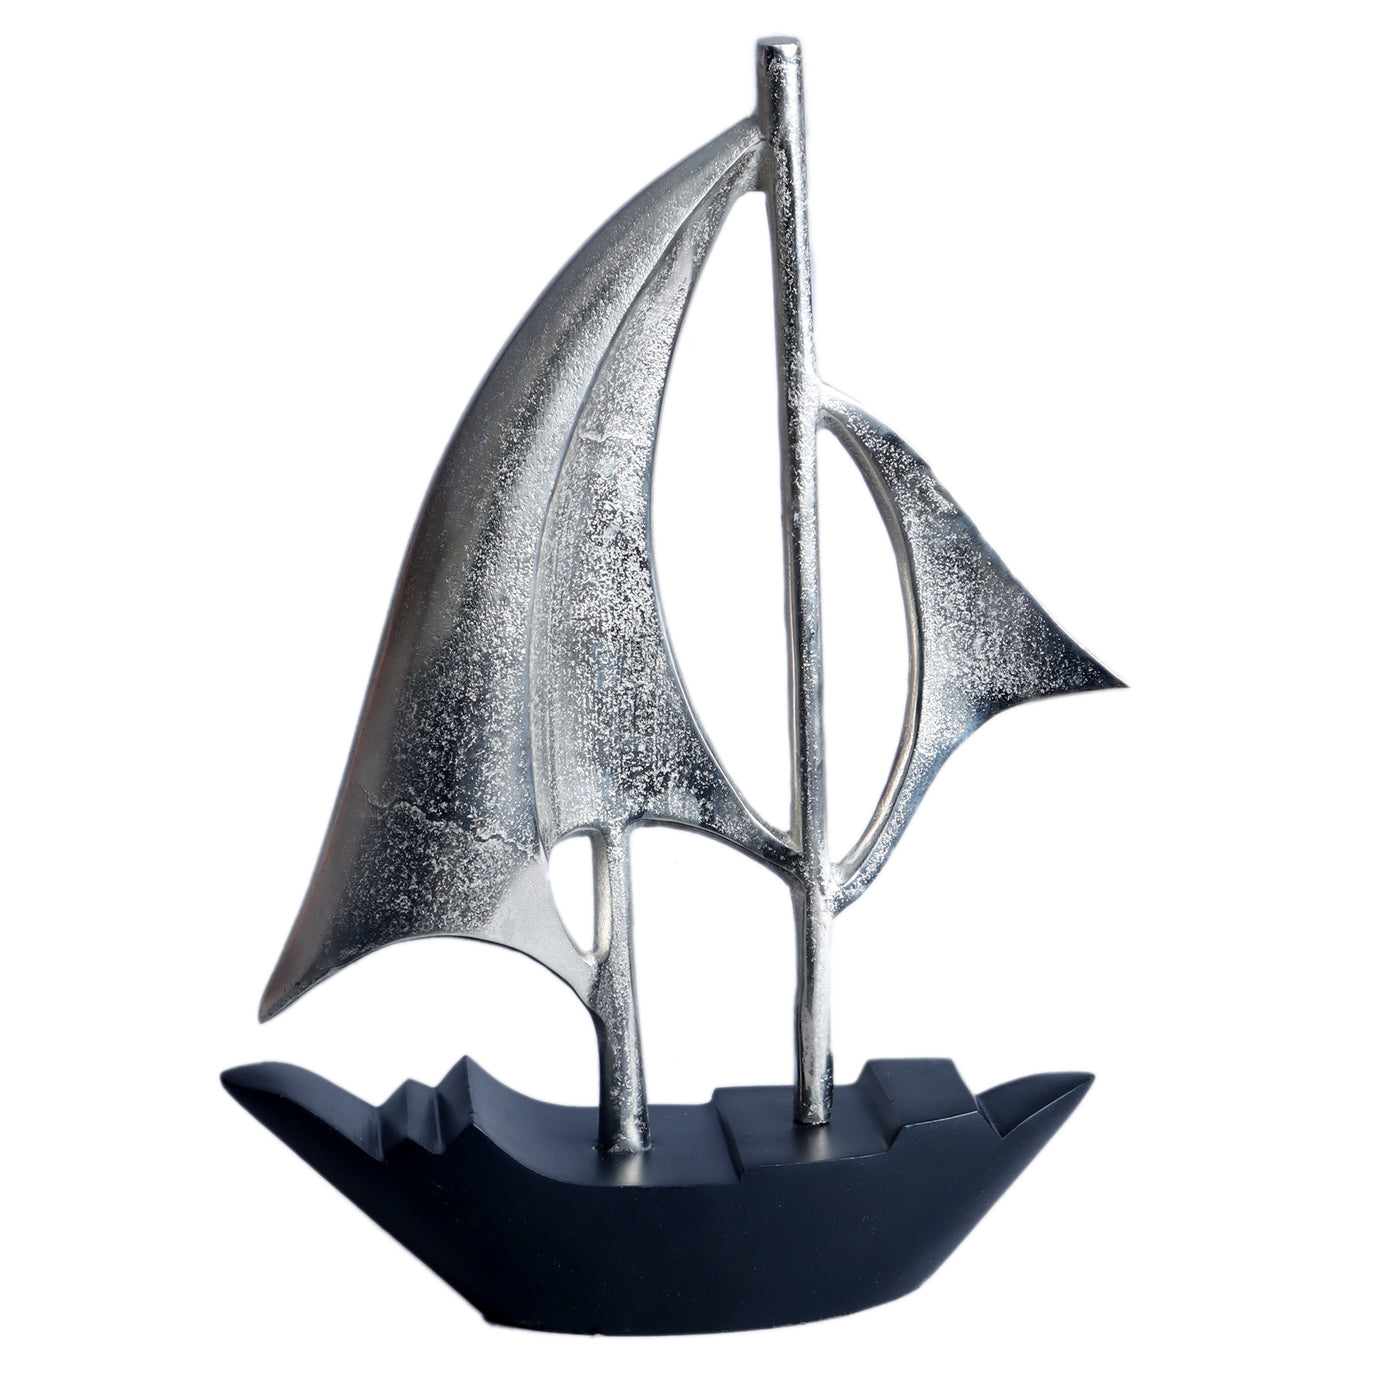 Brings Silver Boat Showpiece for Living Room, Home Decor, Table Decor Office Desk Shelf and Birthday Gift